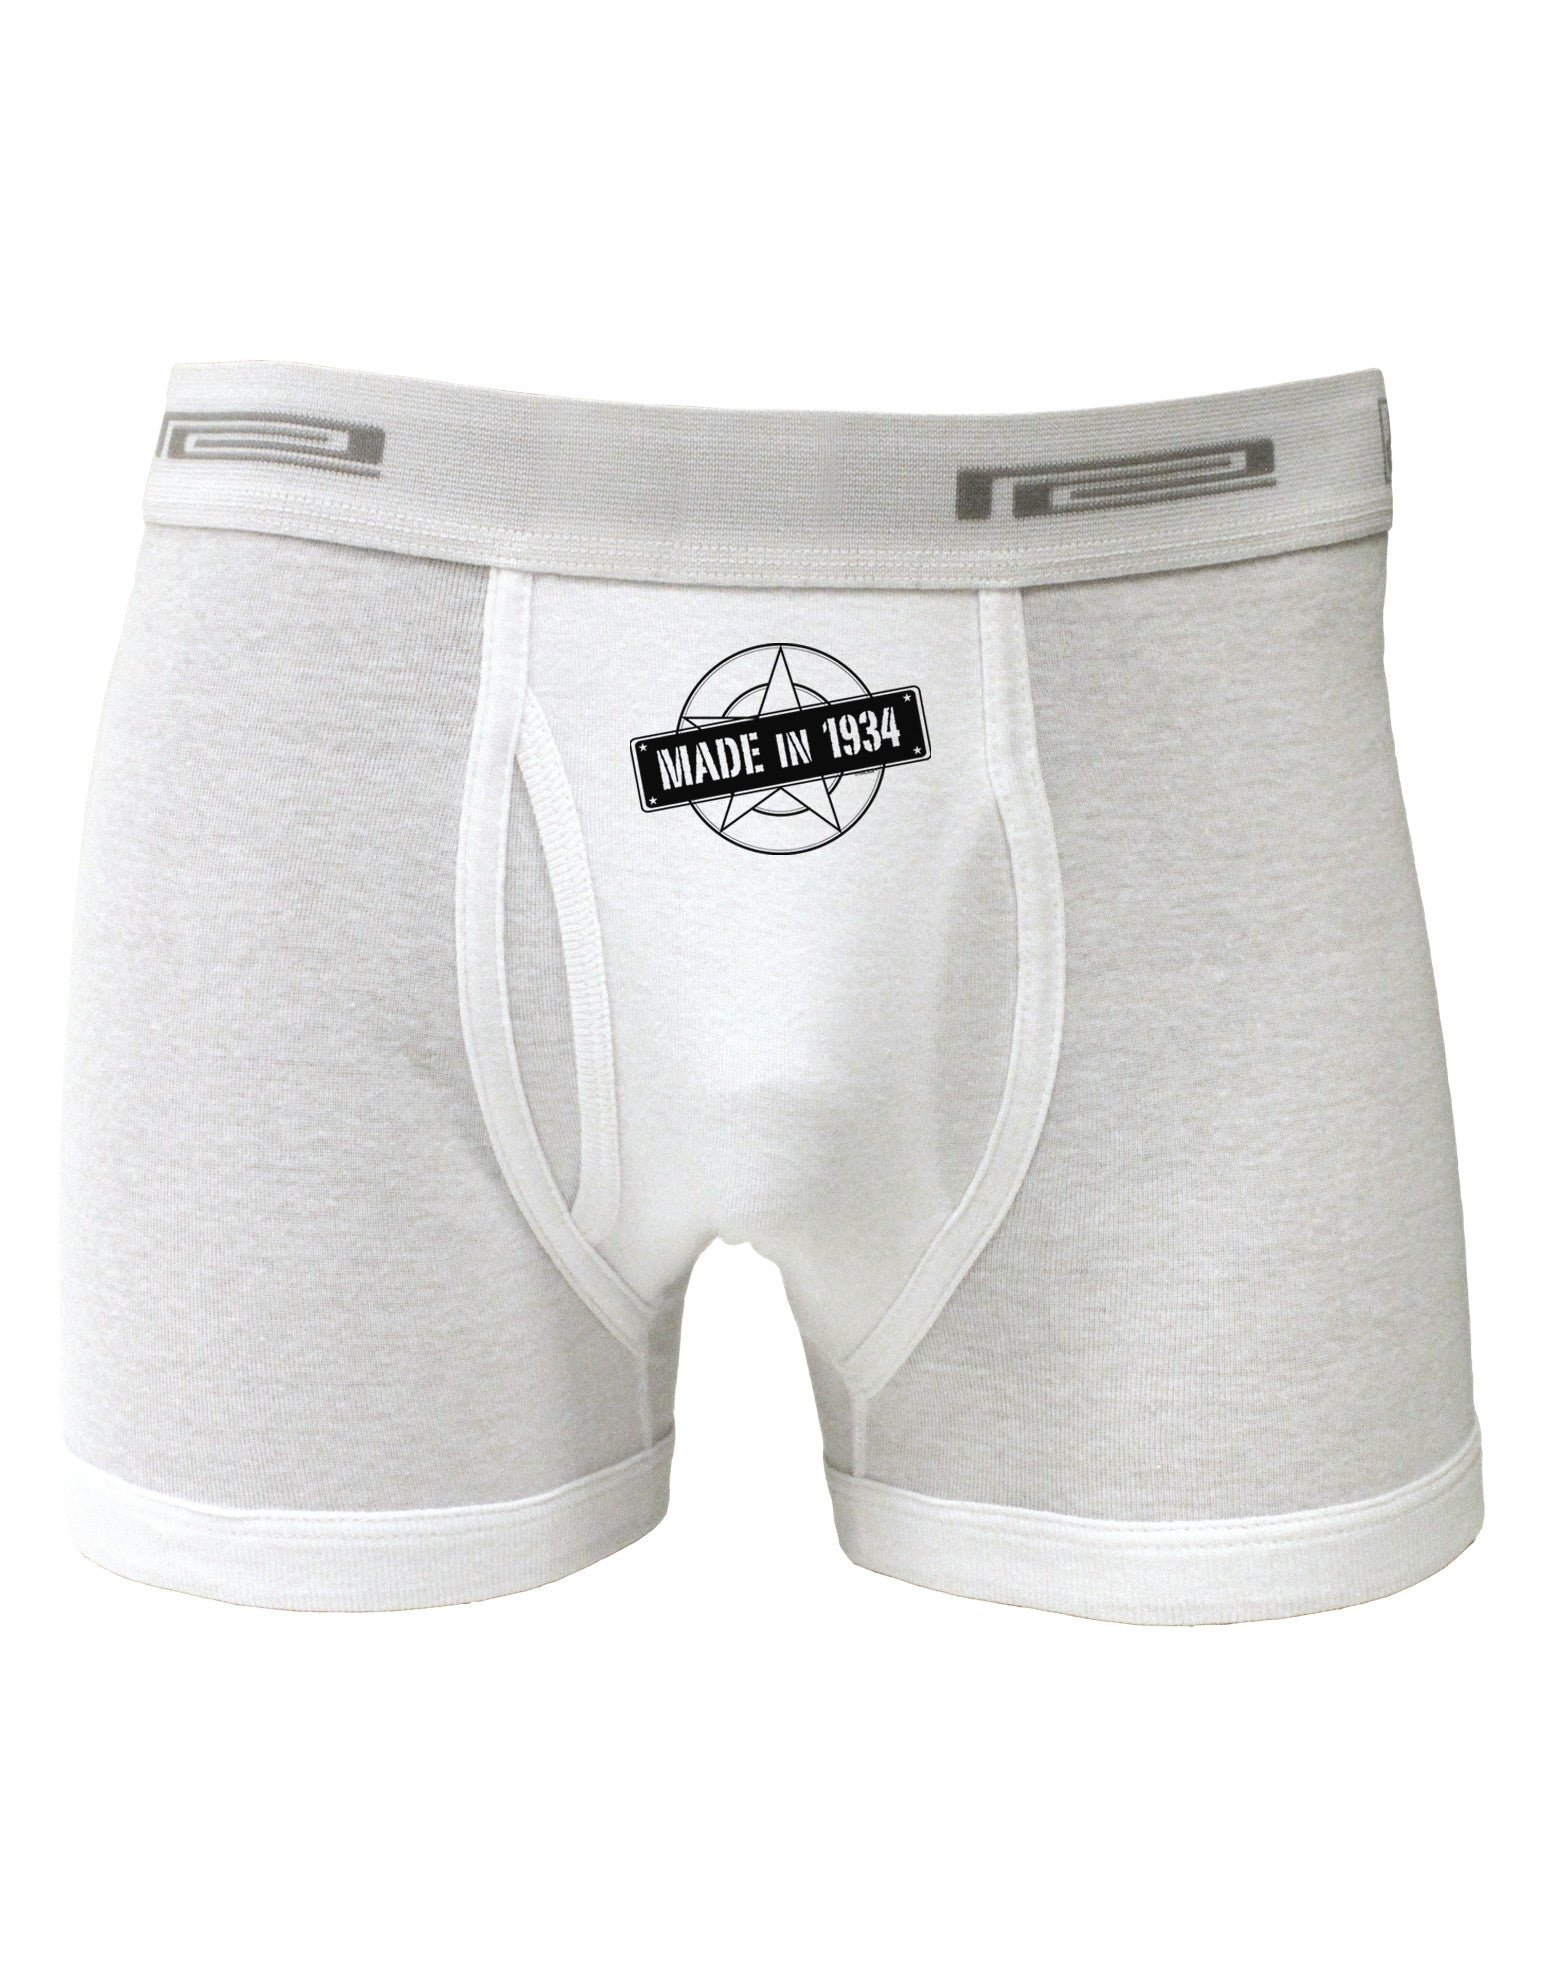 How it's made: Boxer Briefs 